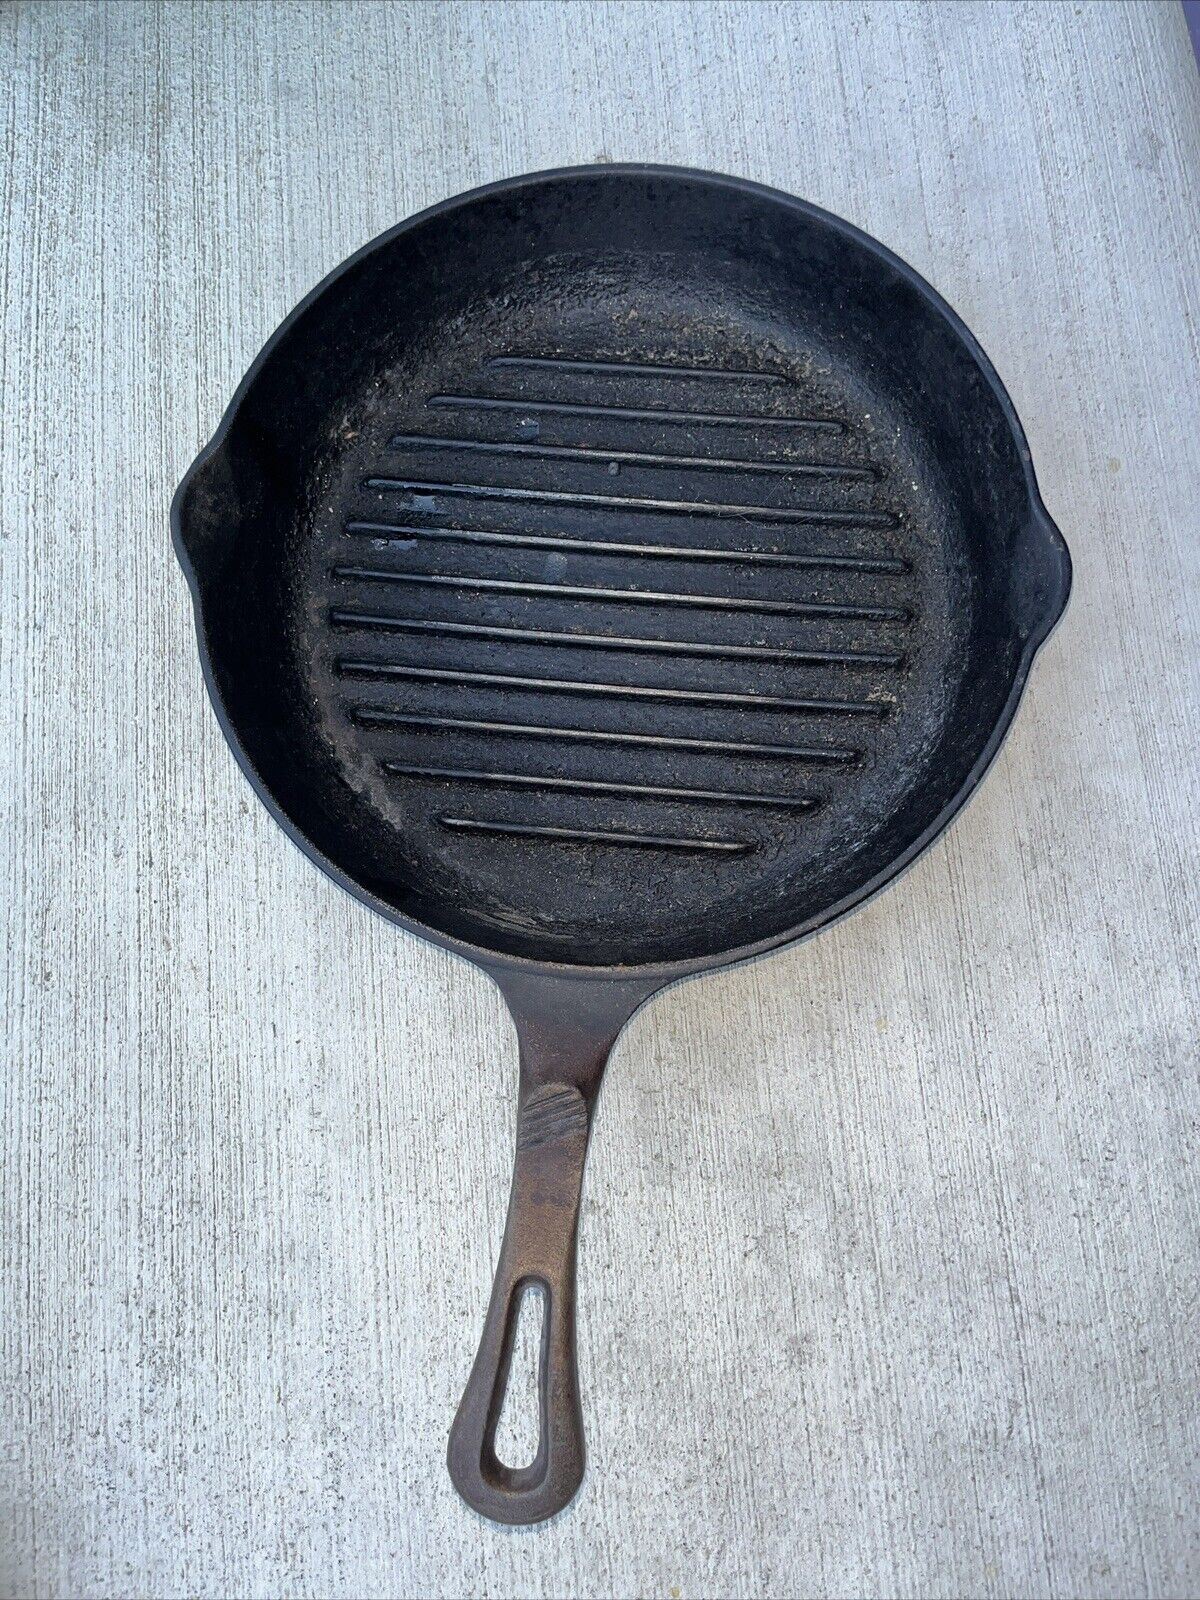 Country Cabin Vintage CAST IRON STEAK GRILL SKILLET PAN